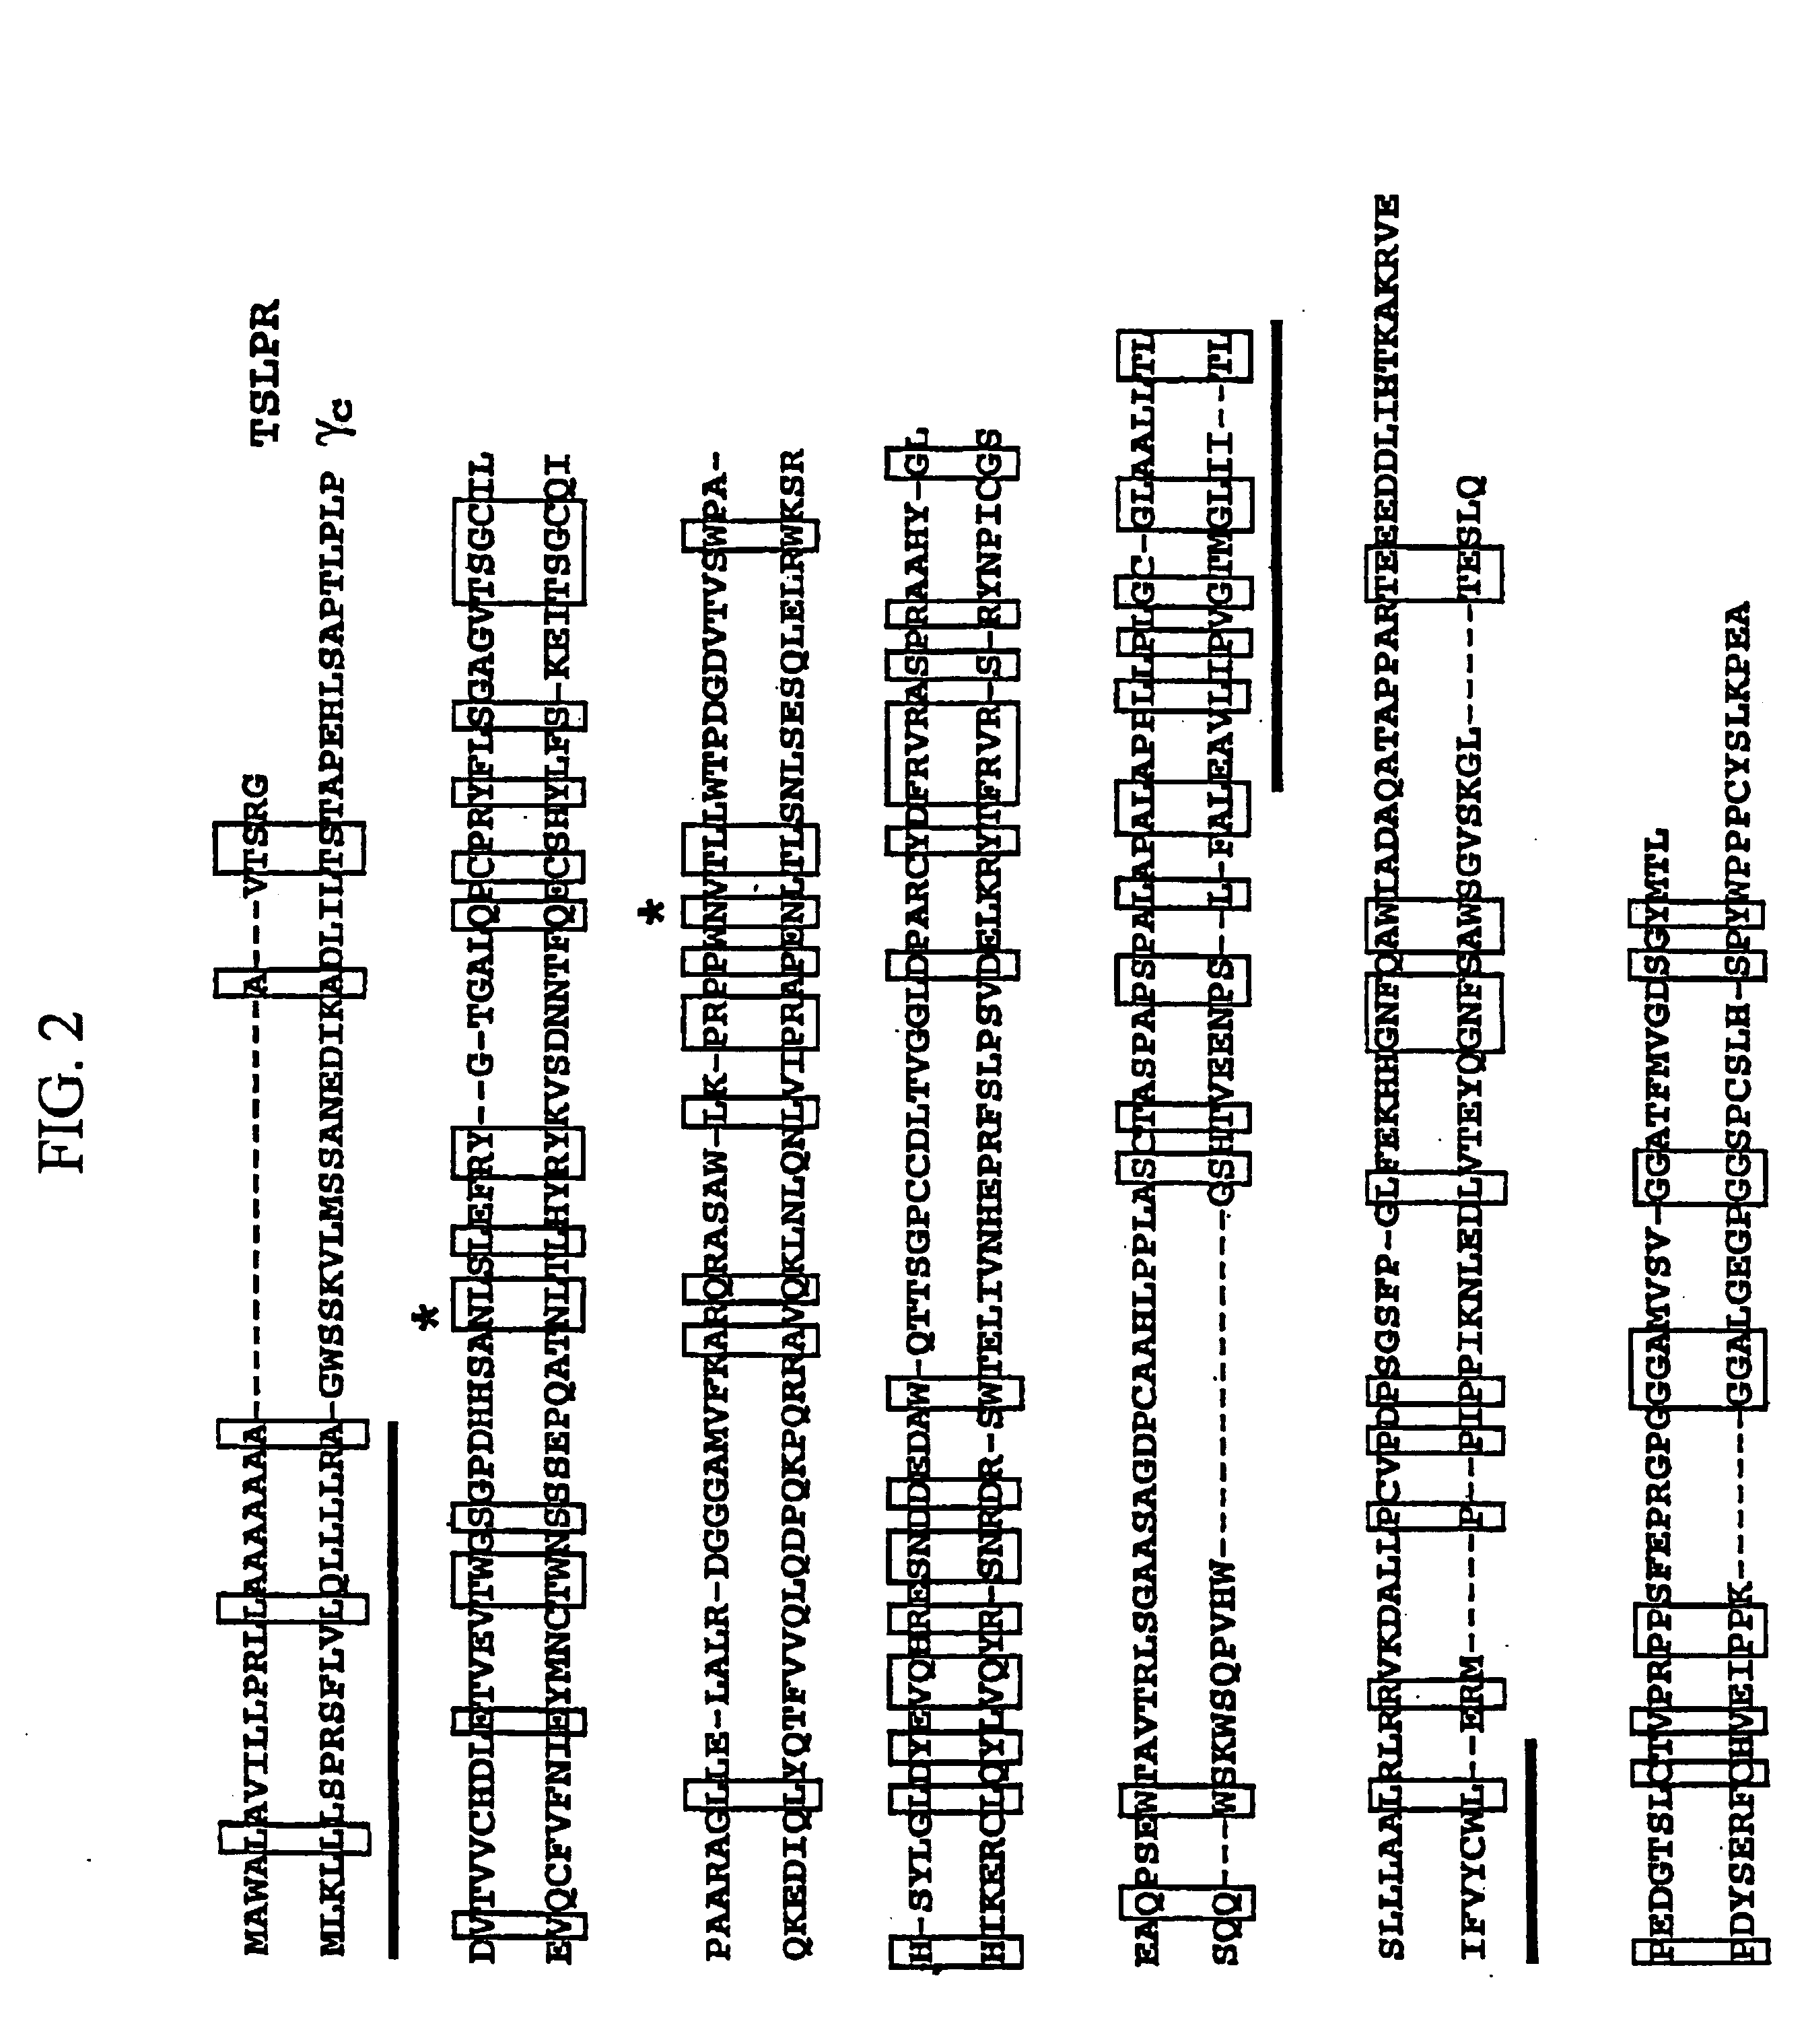 Thymic stromal lymphopoietin receptor molecules and uses thereof